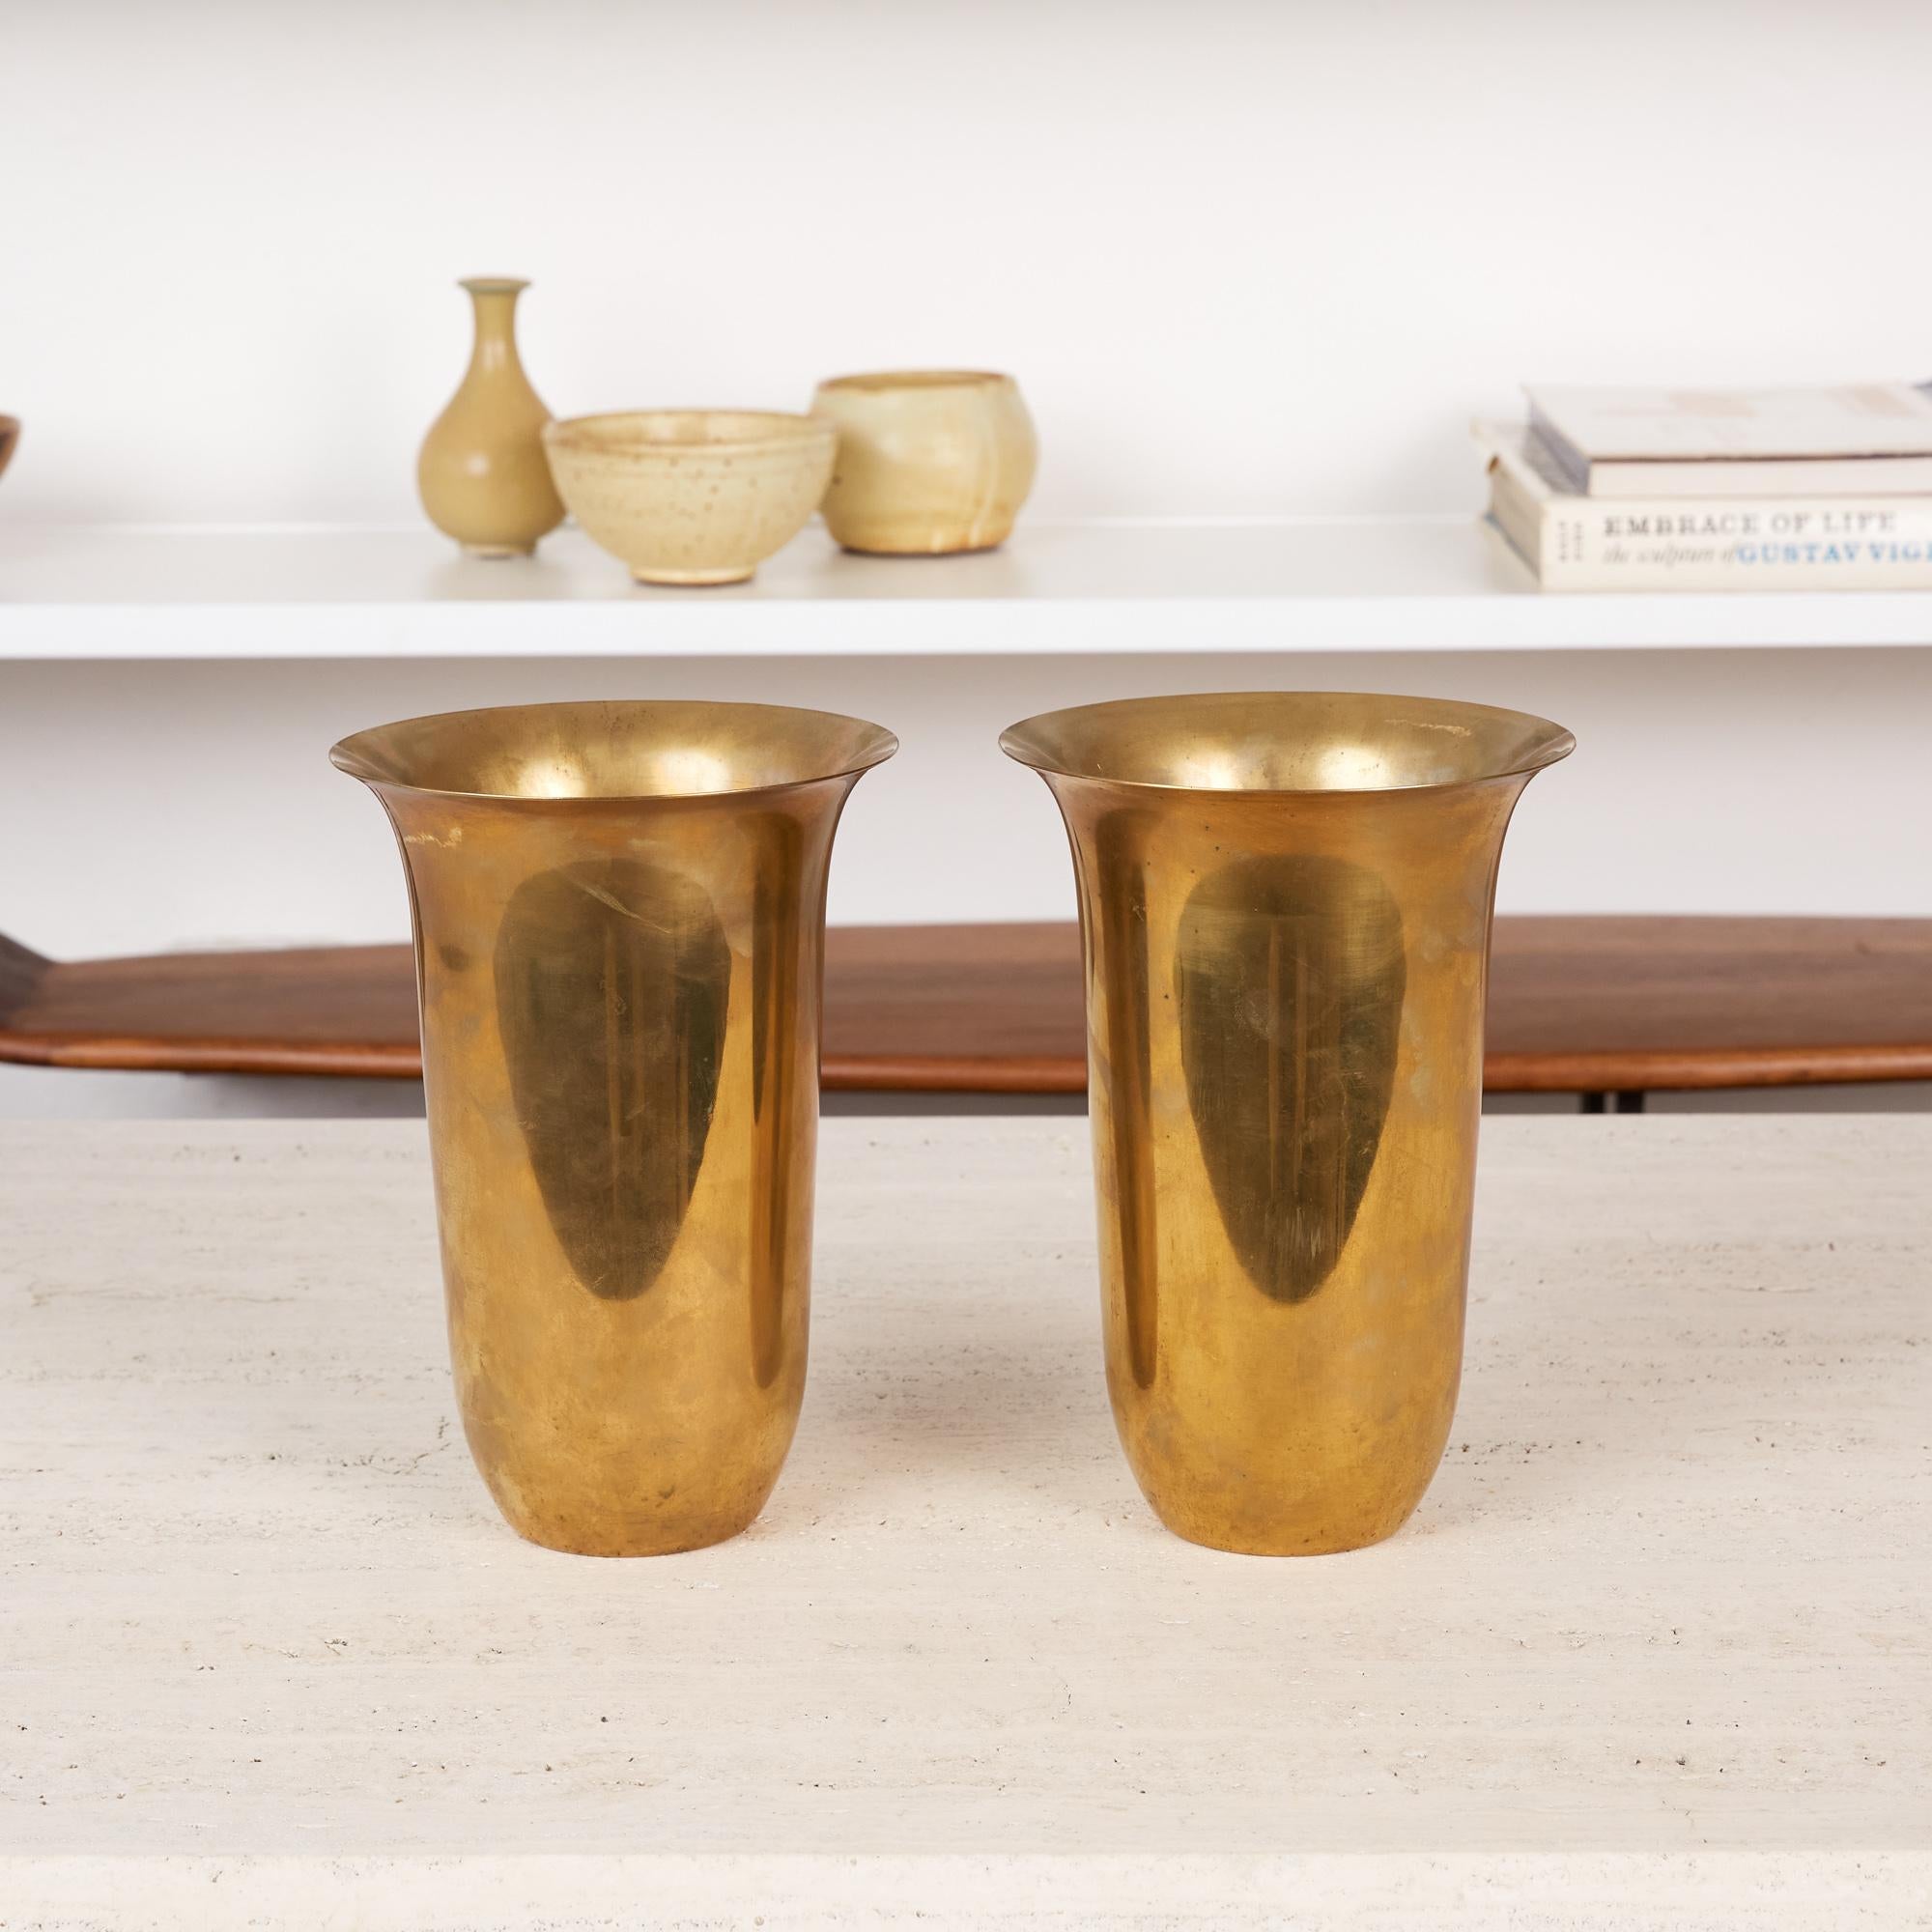 Pair of rare brass vases by Walter Von Nessen for Chase, USA, circa 1930s. The pair of solid patinated brass Art Deco vases are impressed with [Chase] and feature the Chase Minotaur Archer logo on the underside. The Chase Brass and Copper Company of